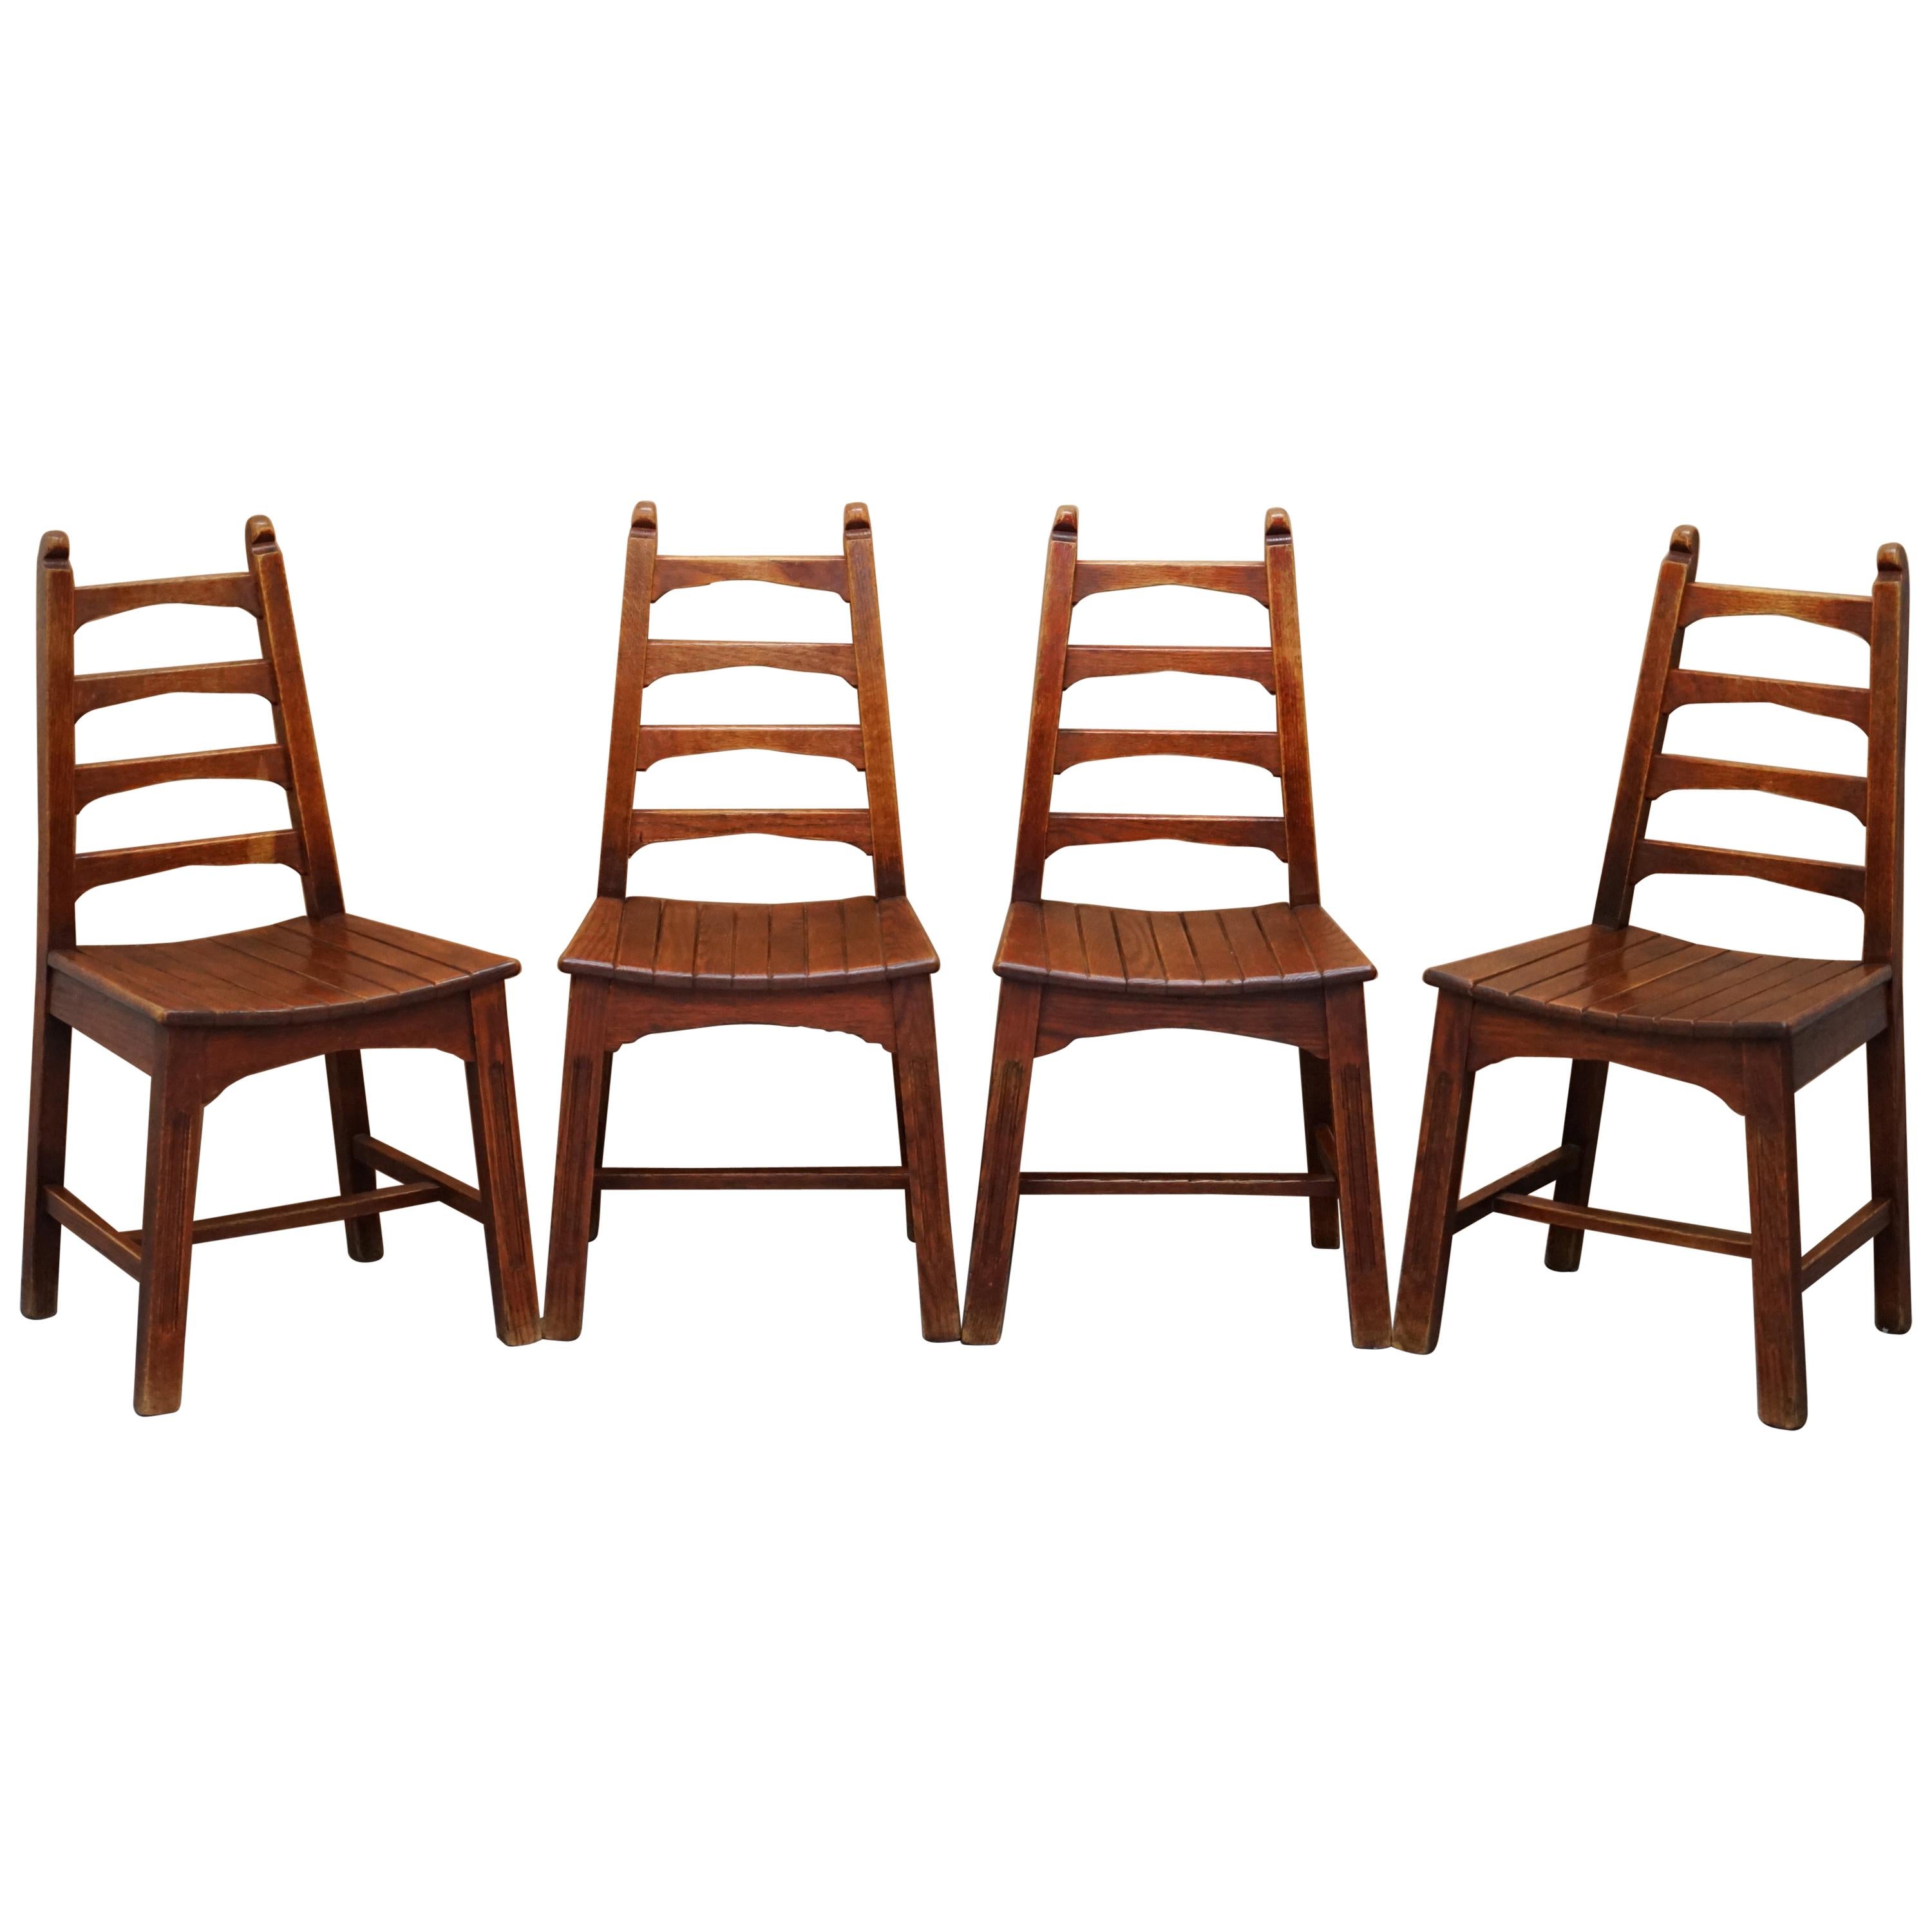 Set of Four Stylish Mid-Century Modern Red Oak Dining Chairs Nice Sculptural For Sale